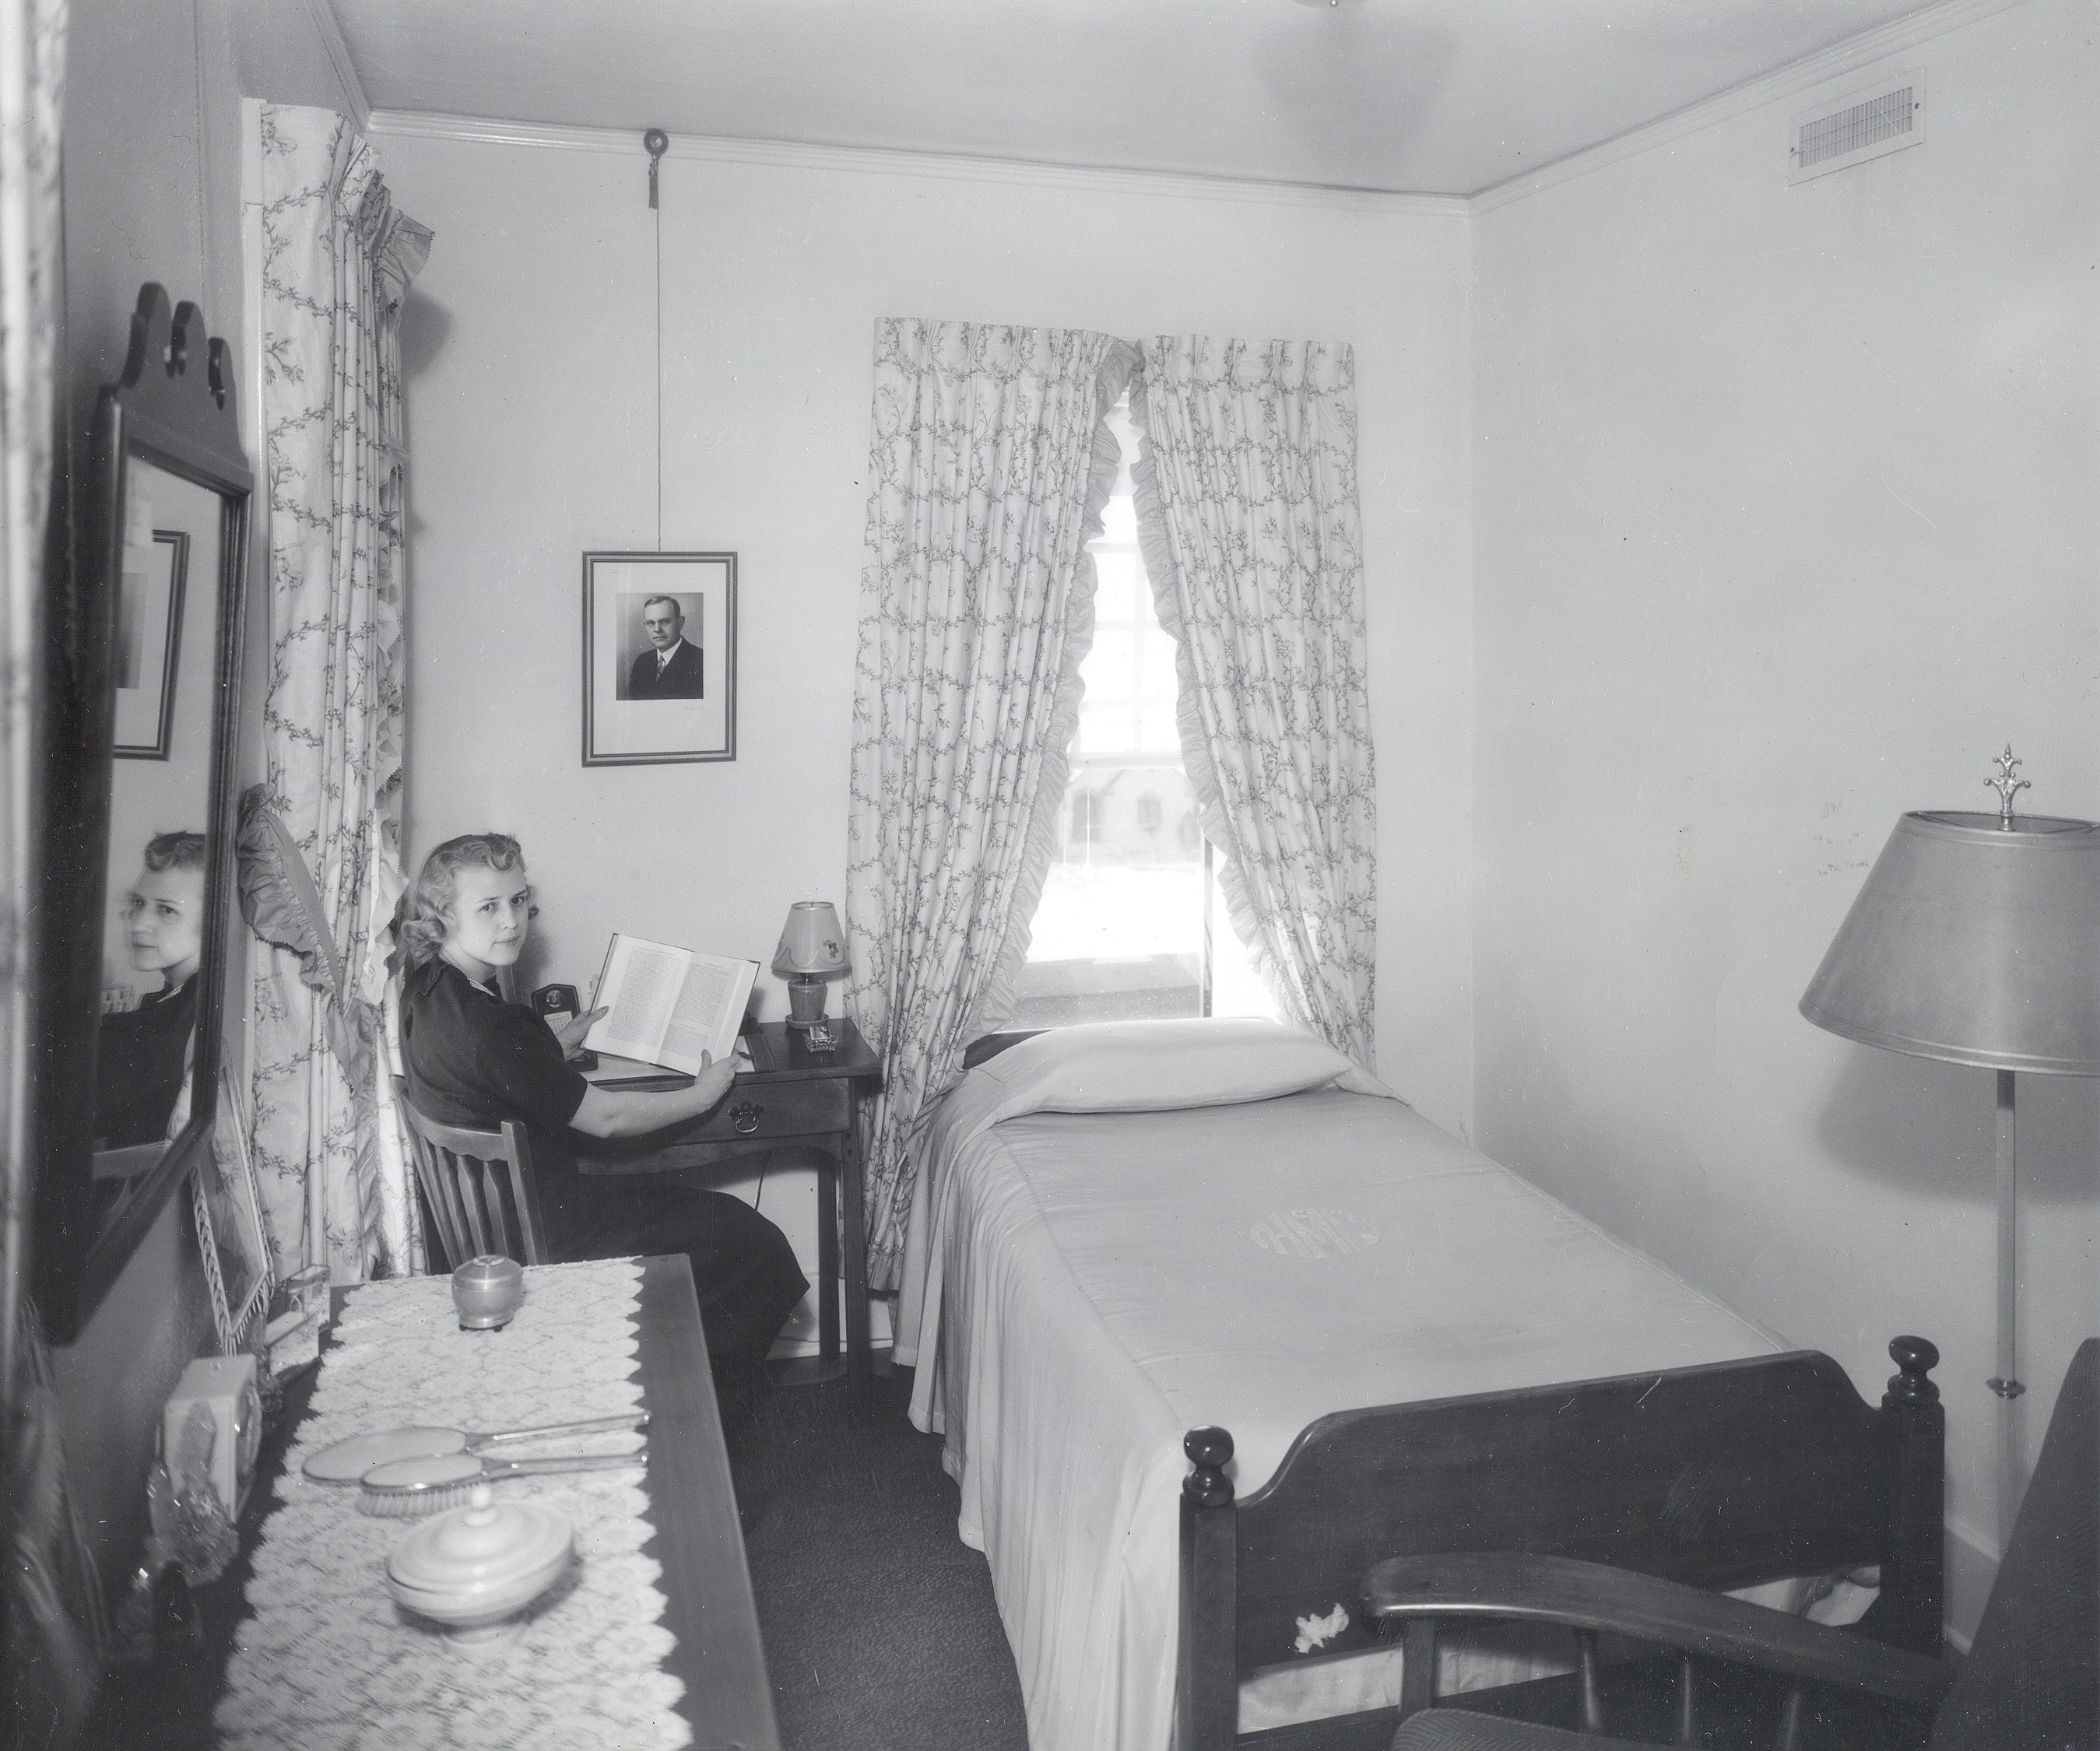 Montgomery Hall Student Room 1938 after the Interior Remodel <span class="cc-gallery-credit"></span>